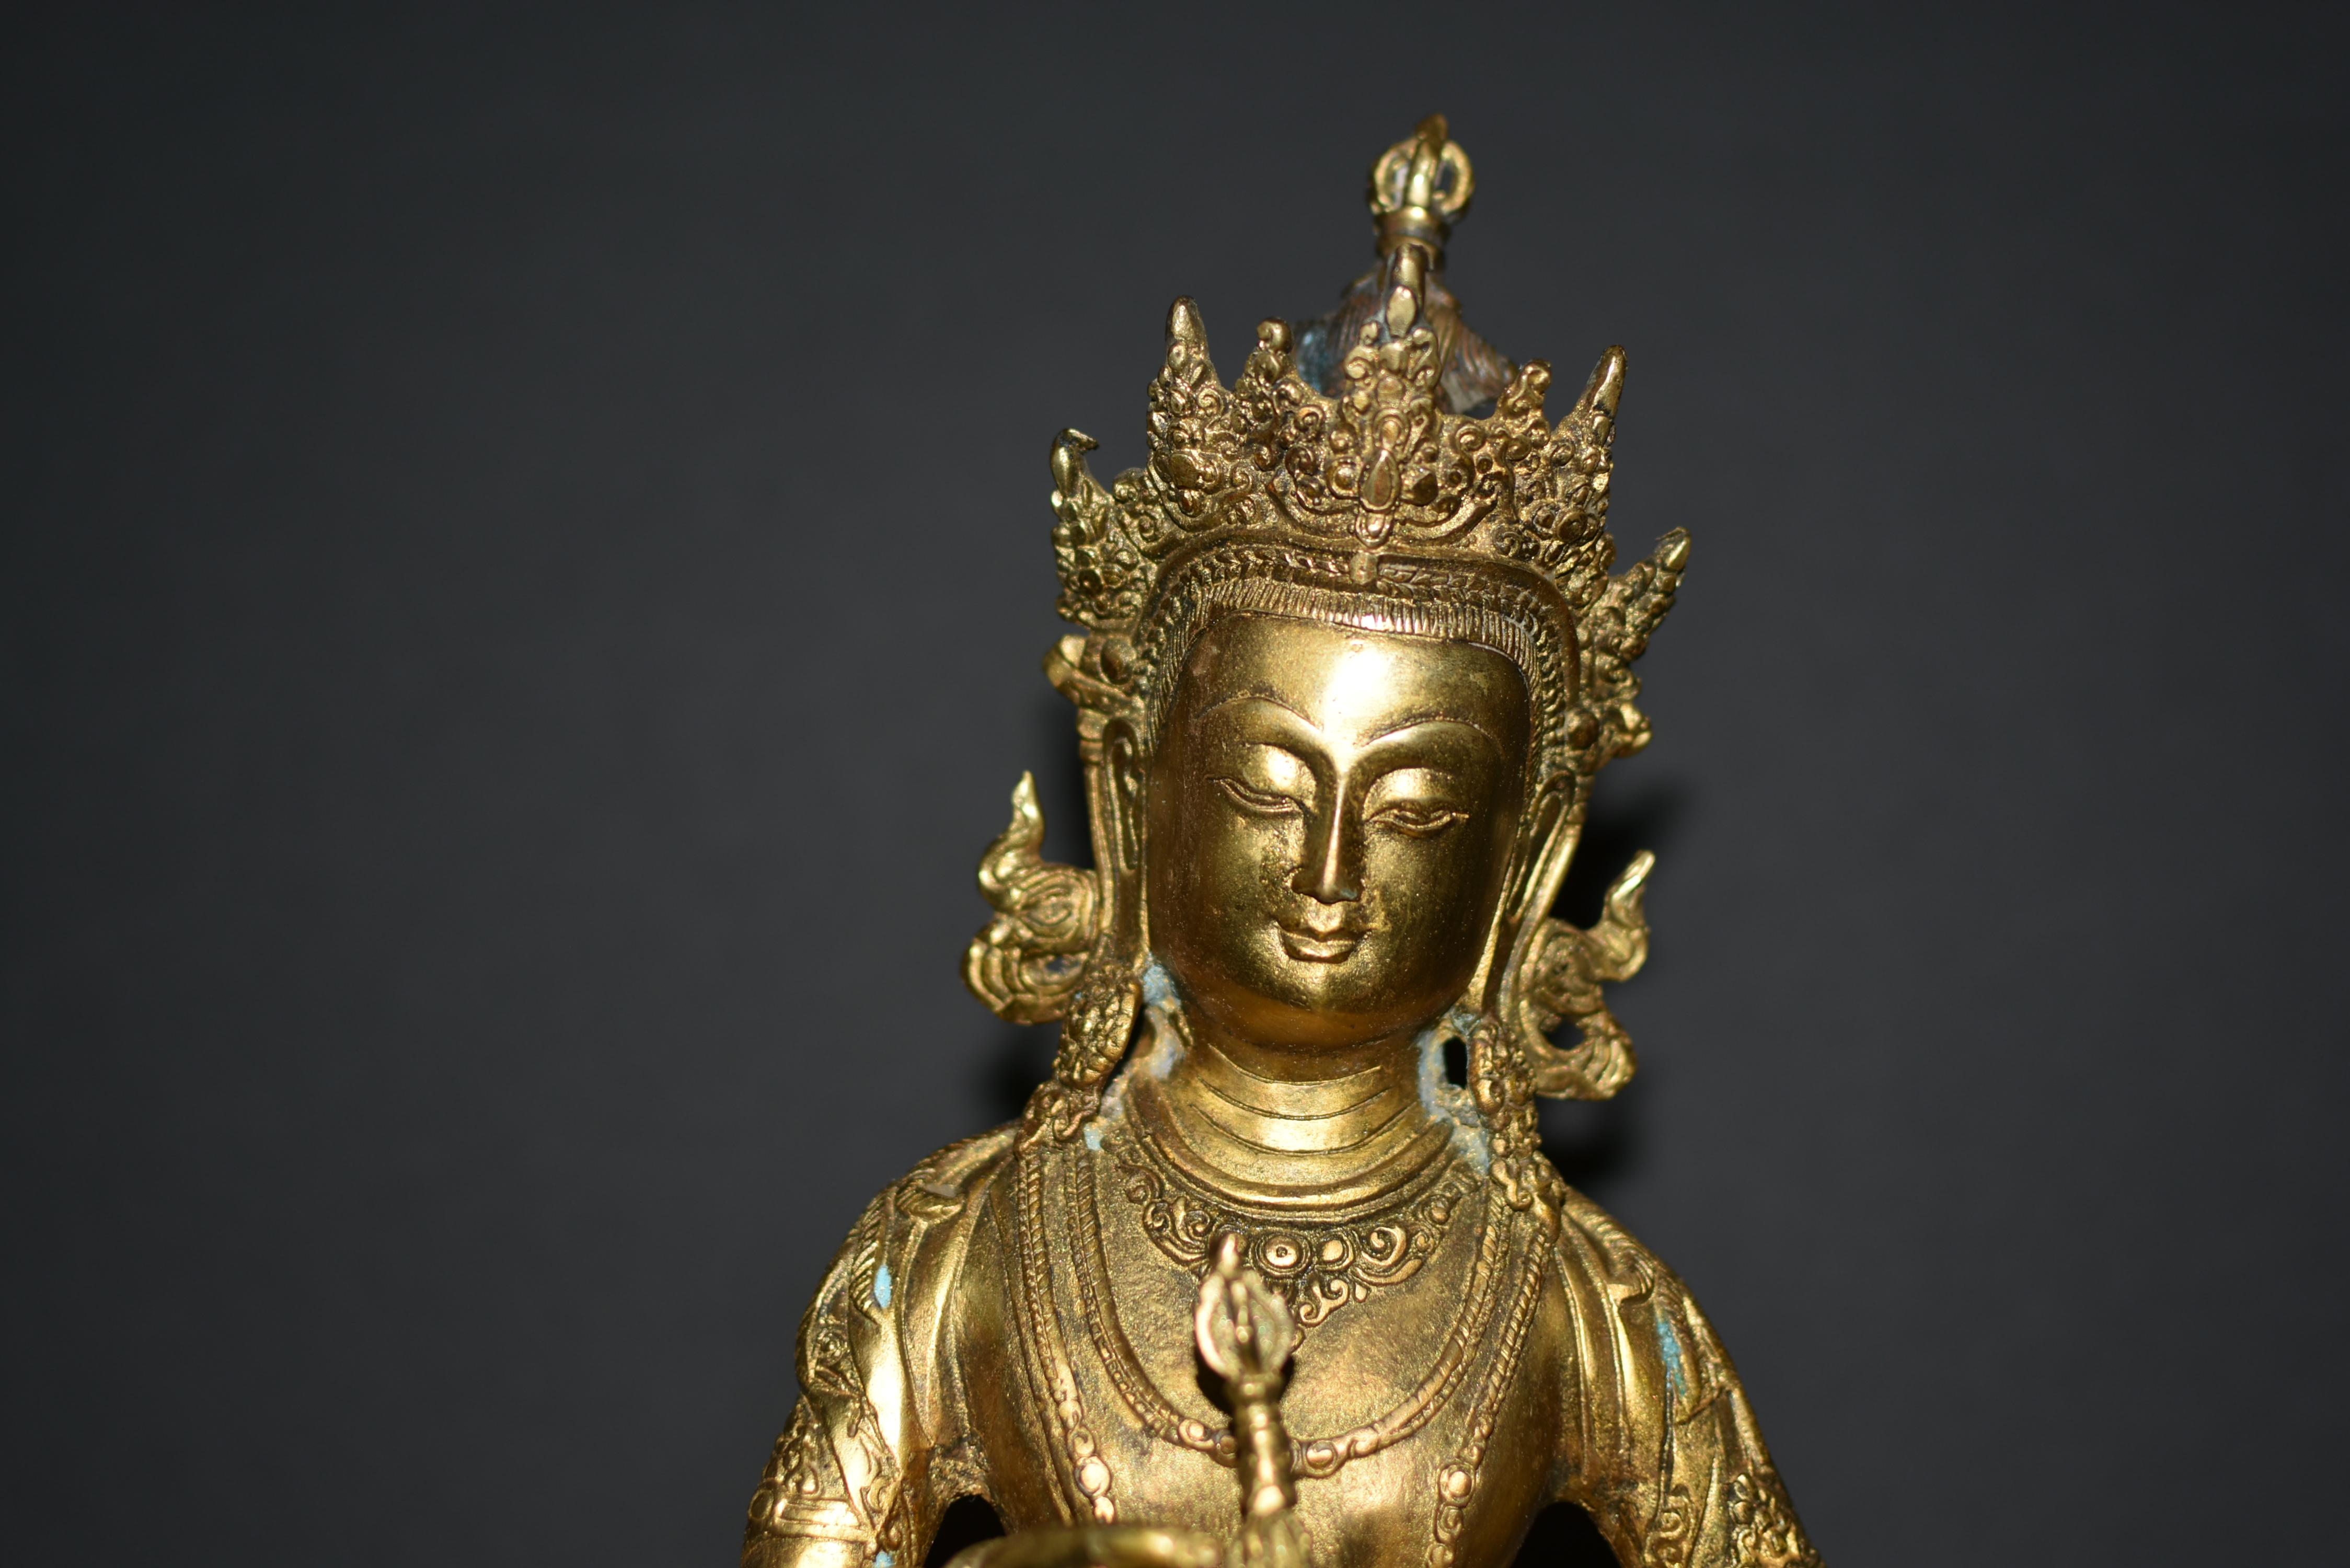 This gilt bronze sculpture of Buddha Vajrasattva stands as a testament to the sublime craftsmanship and spiritual significance of Tibetan Buddhist art. Weighing a substantial 7.25 pounds, the sculpture portrays the enlightened deity seated in the